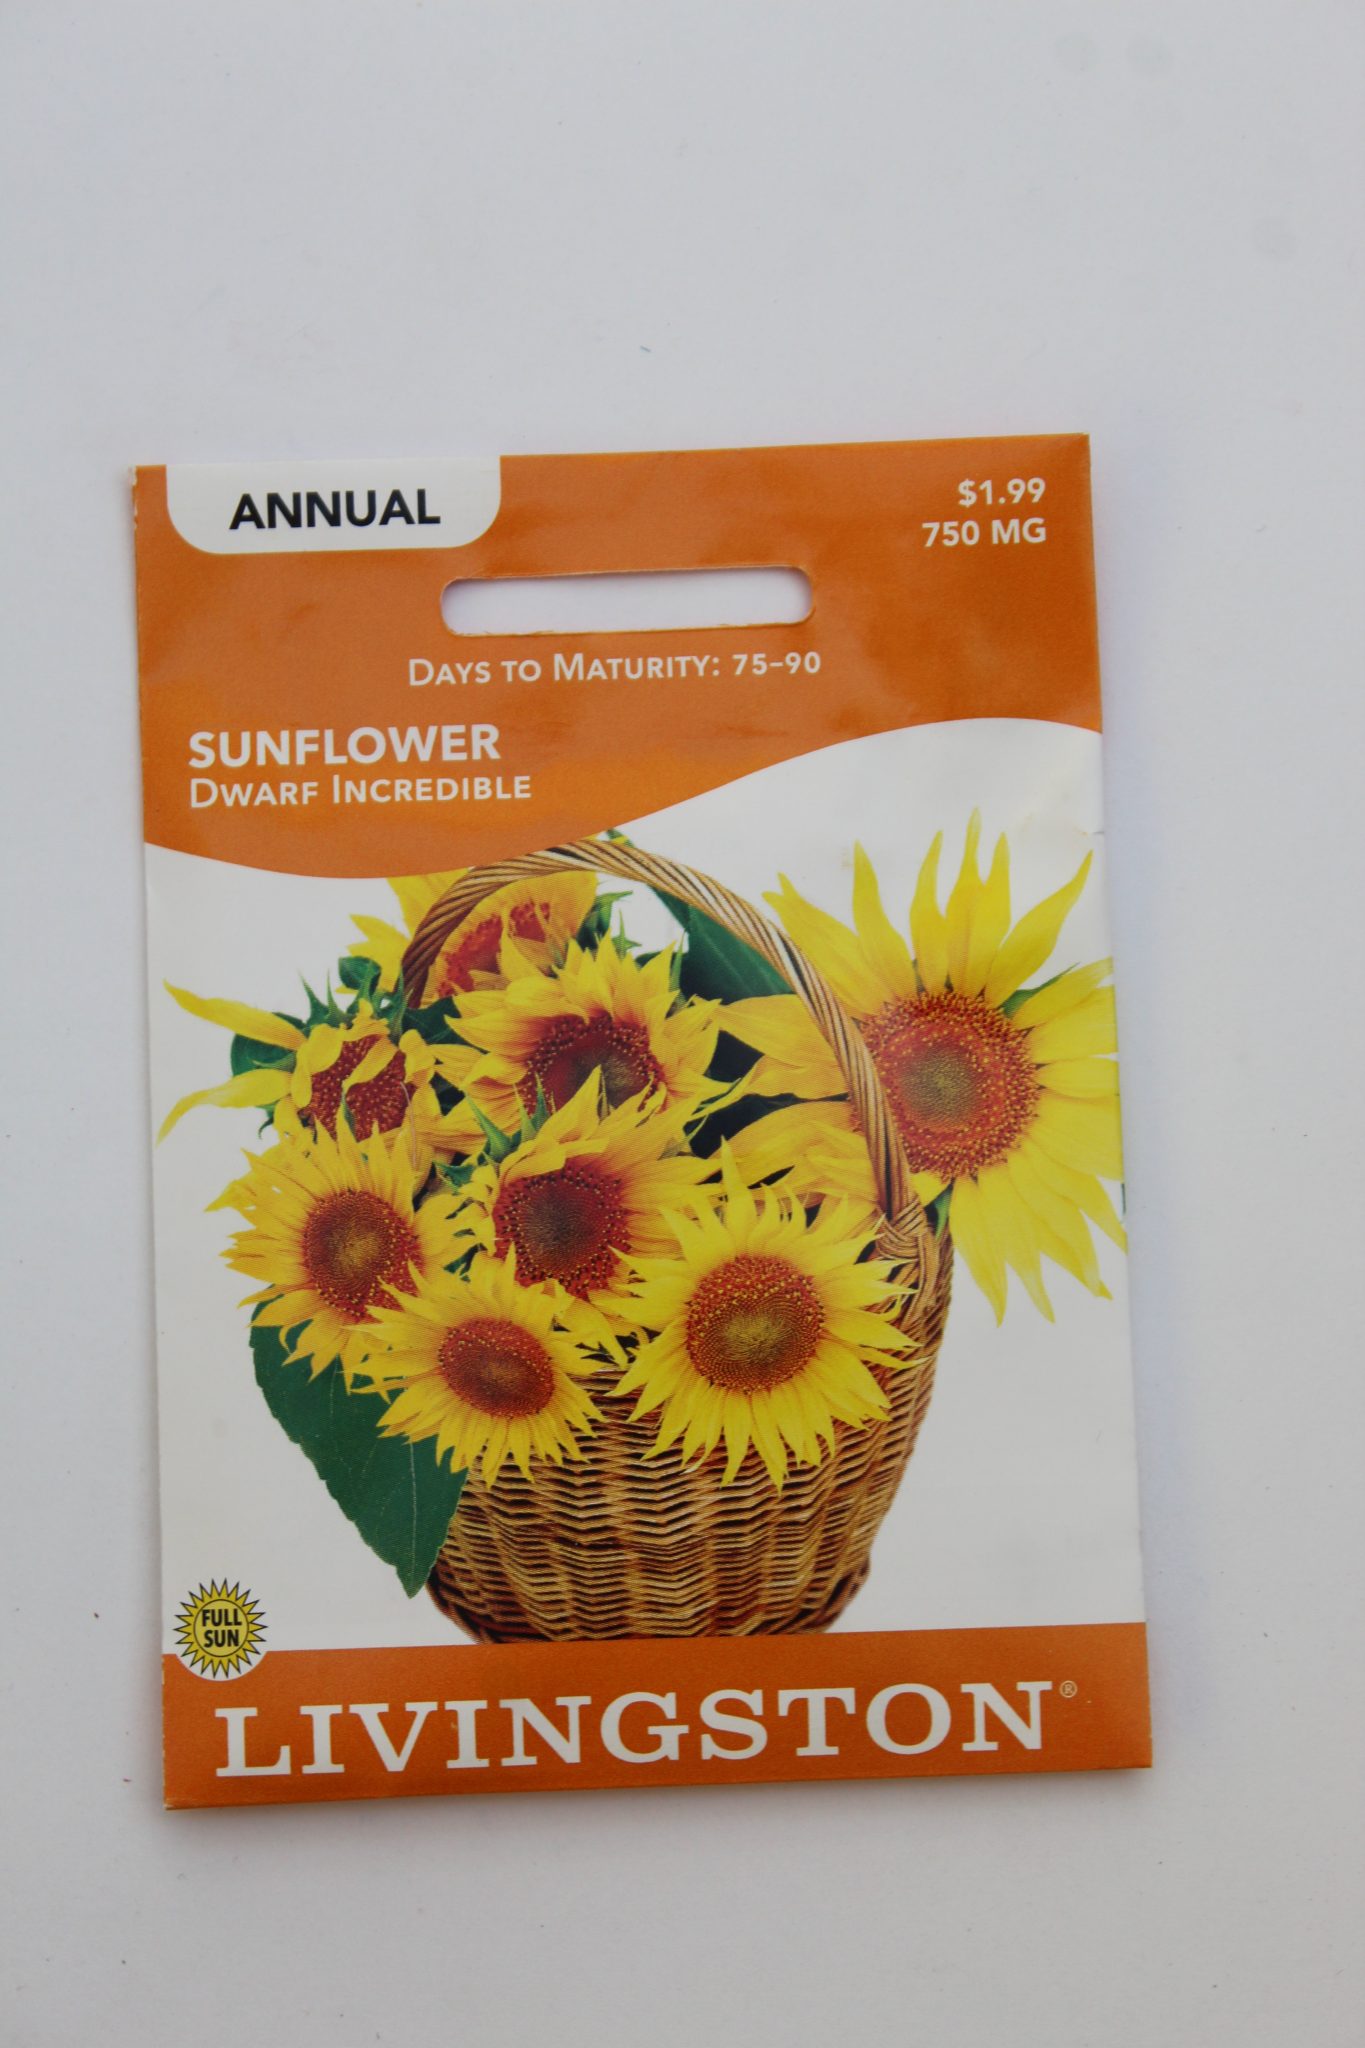 Y2005 Dwarf Incredible Sunflower Seed, Summer to Fall Bloom, 750 mg Pack